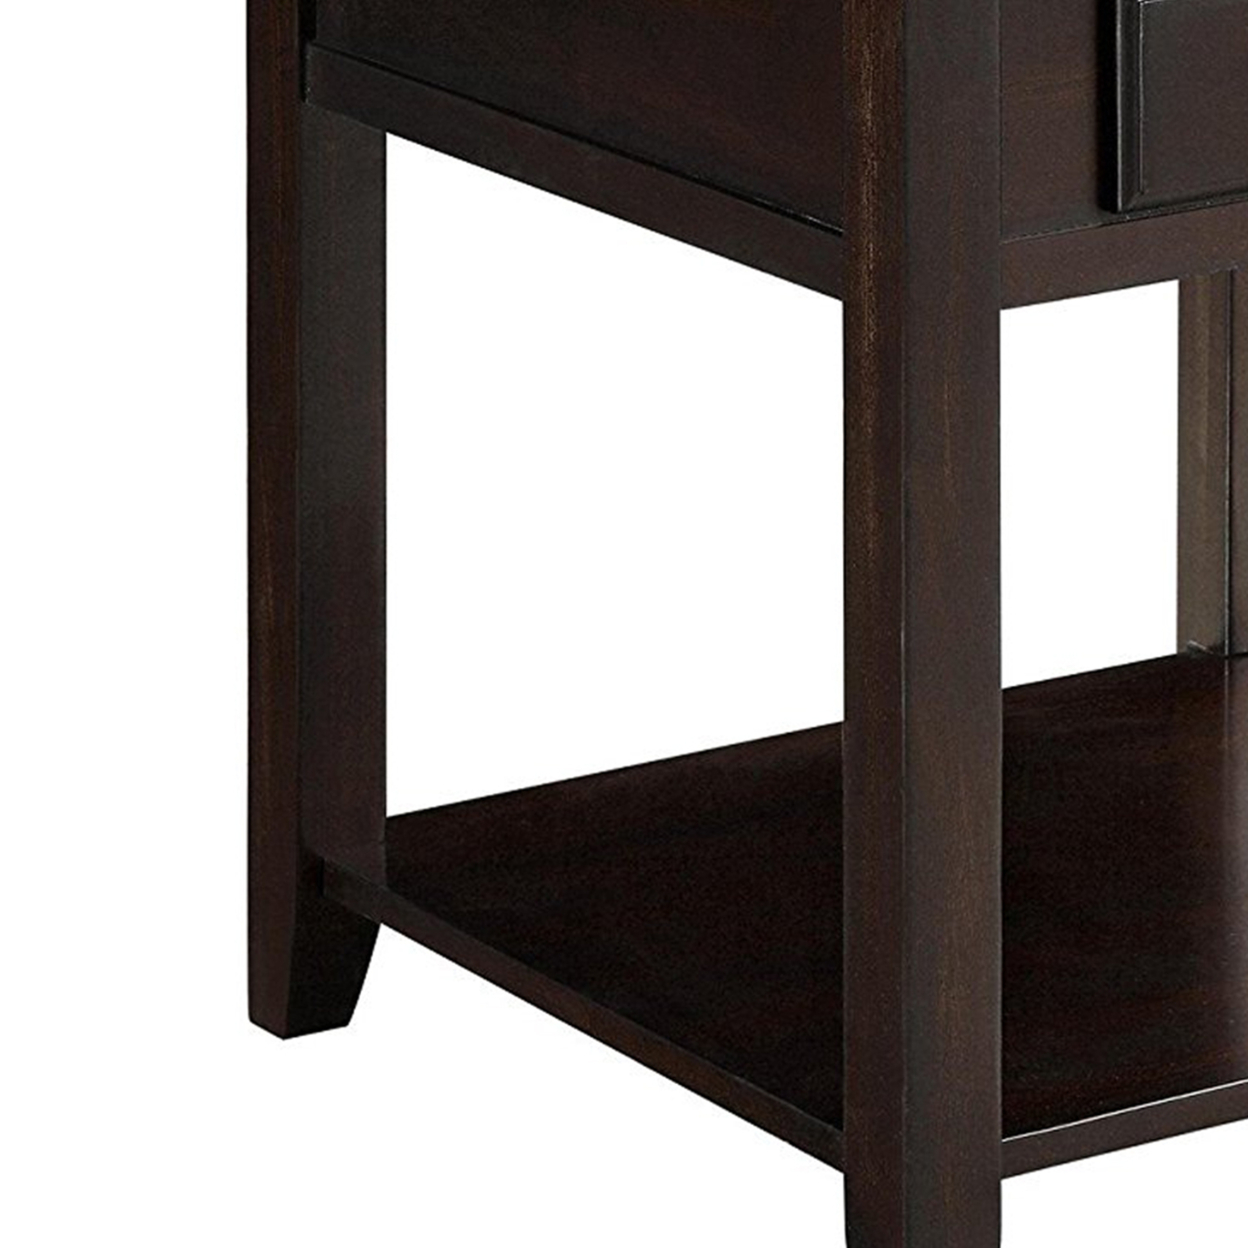 Wooden End Table With Drawer And Bottom Shelf, Walnut Brown- Saltoro Sherpi